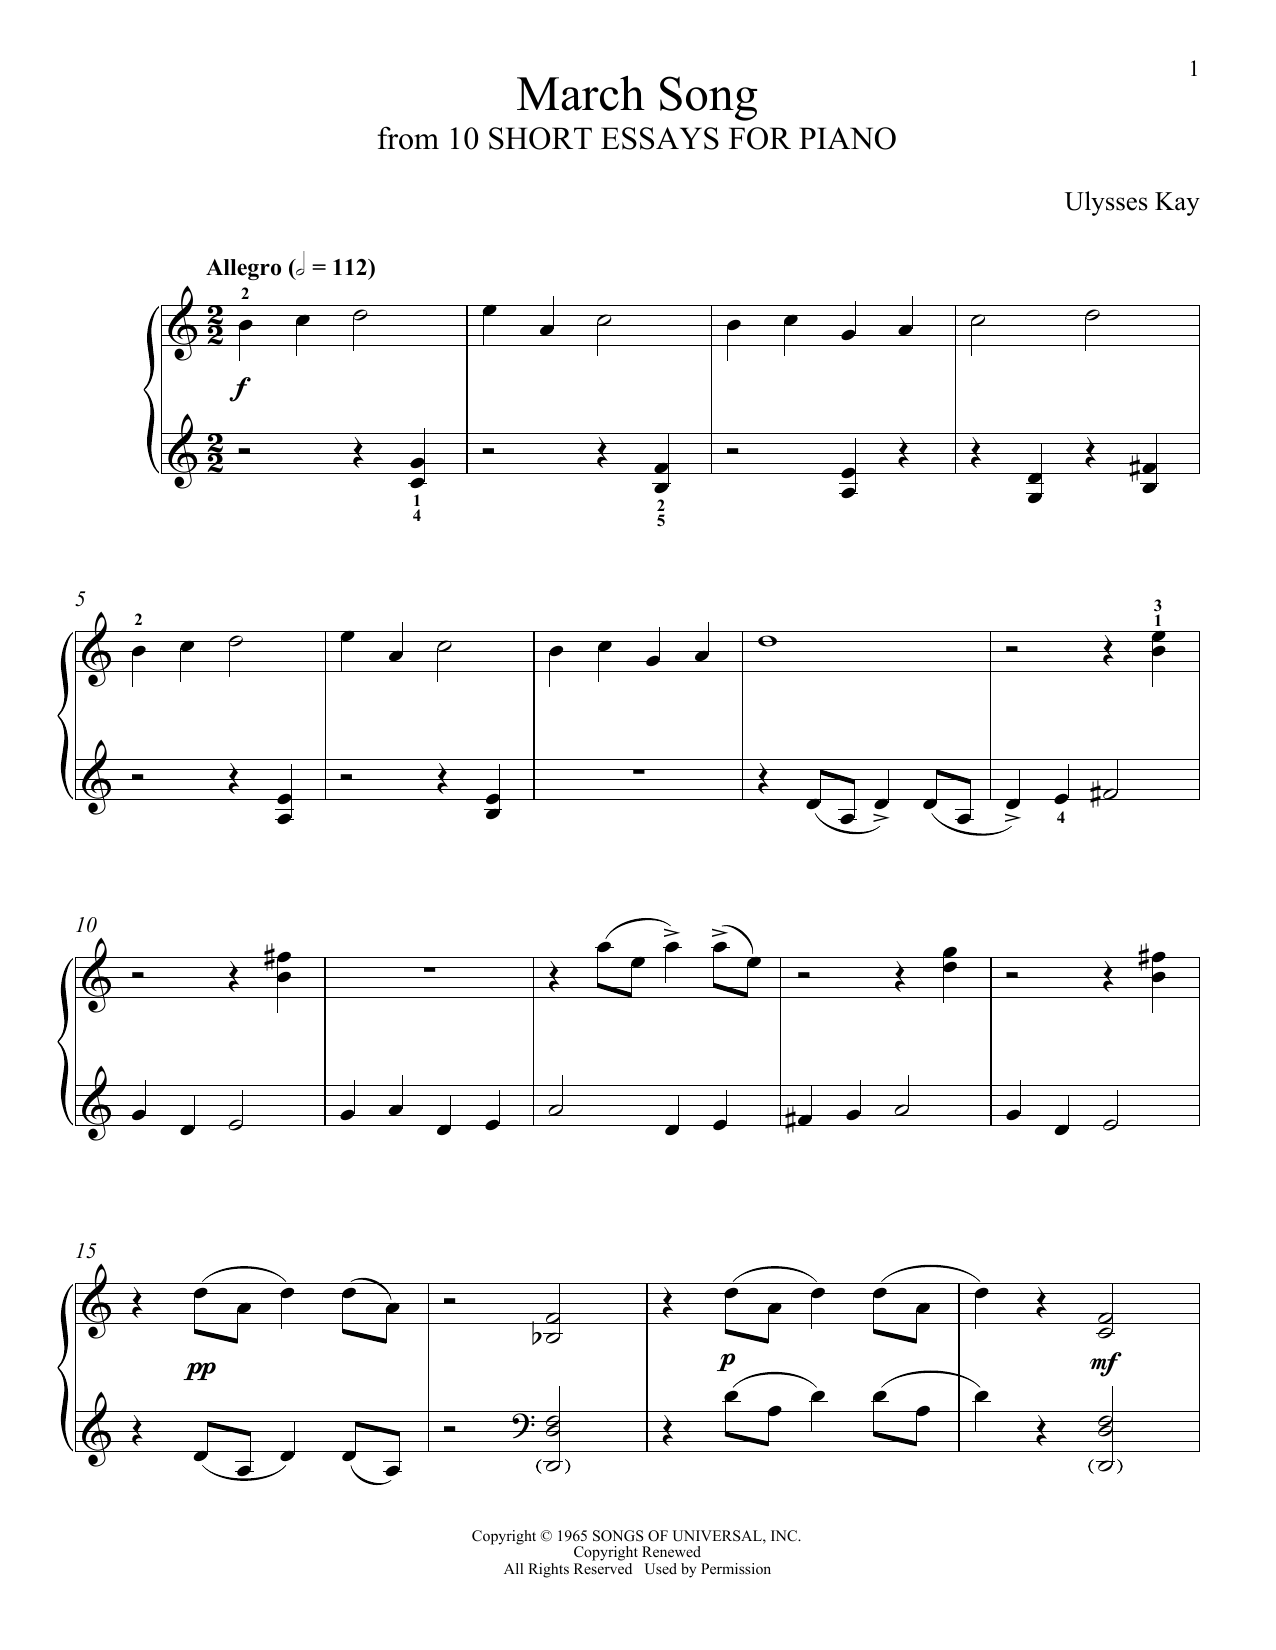 Download Ulysses Kay March Song Sheet Music